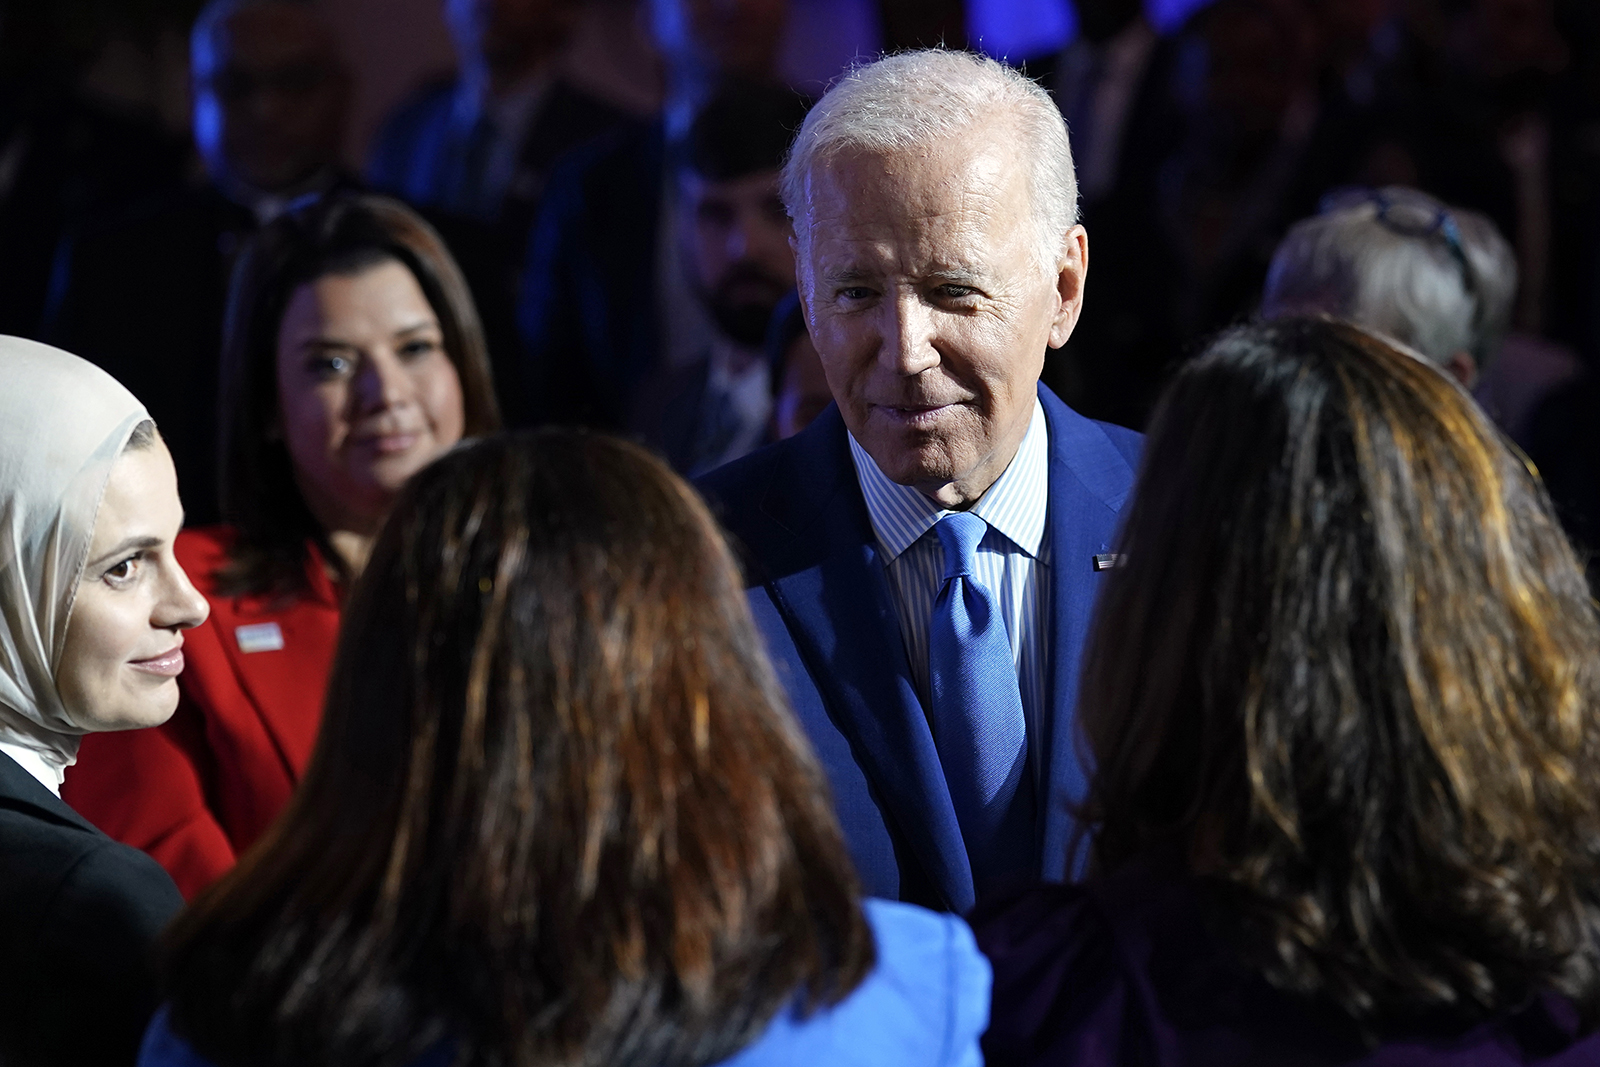 President Joe Biden greets people after speaking at the United We Stand Summit in the East Room of the White House in Washington, Thursday, Sept. 15, 2022. The summit is aimed at combating a spate of hate-fueled violence in the U.S., as he works to deliver on his campaign pledge to 